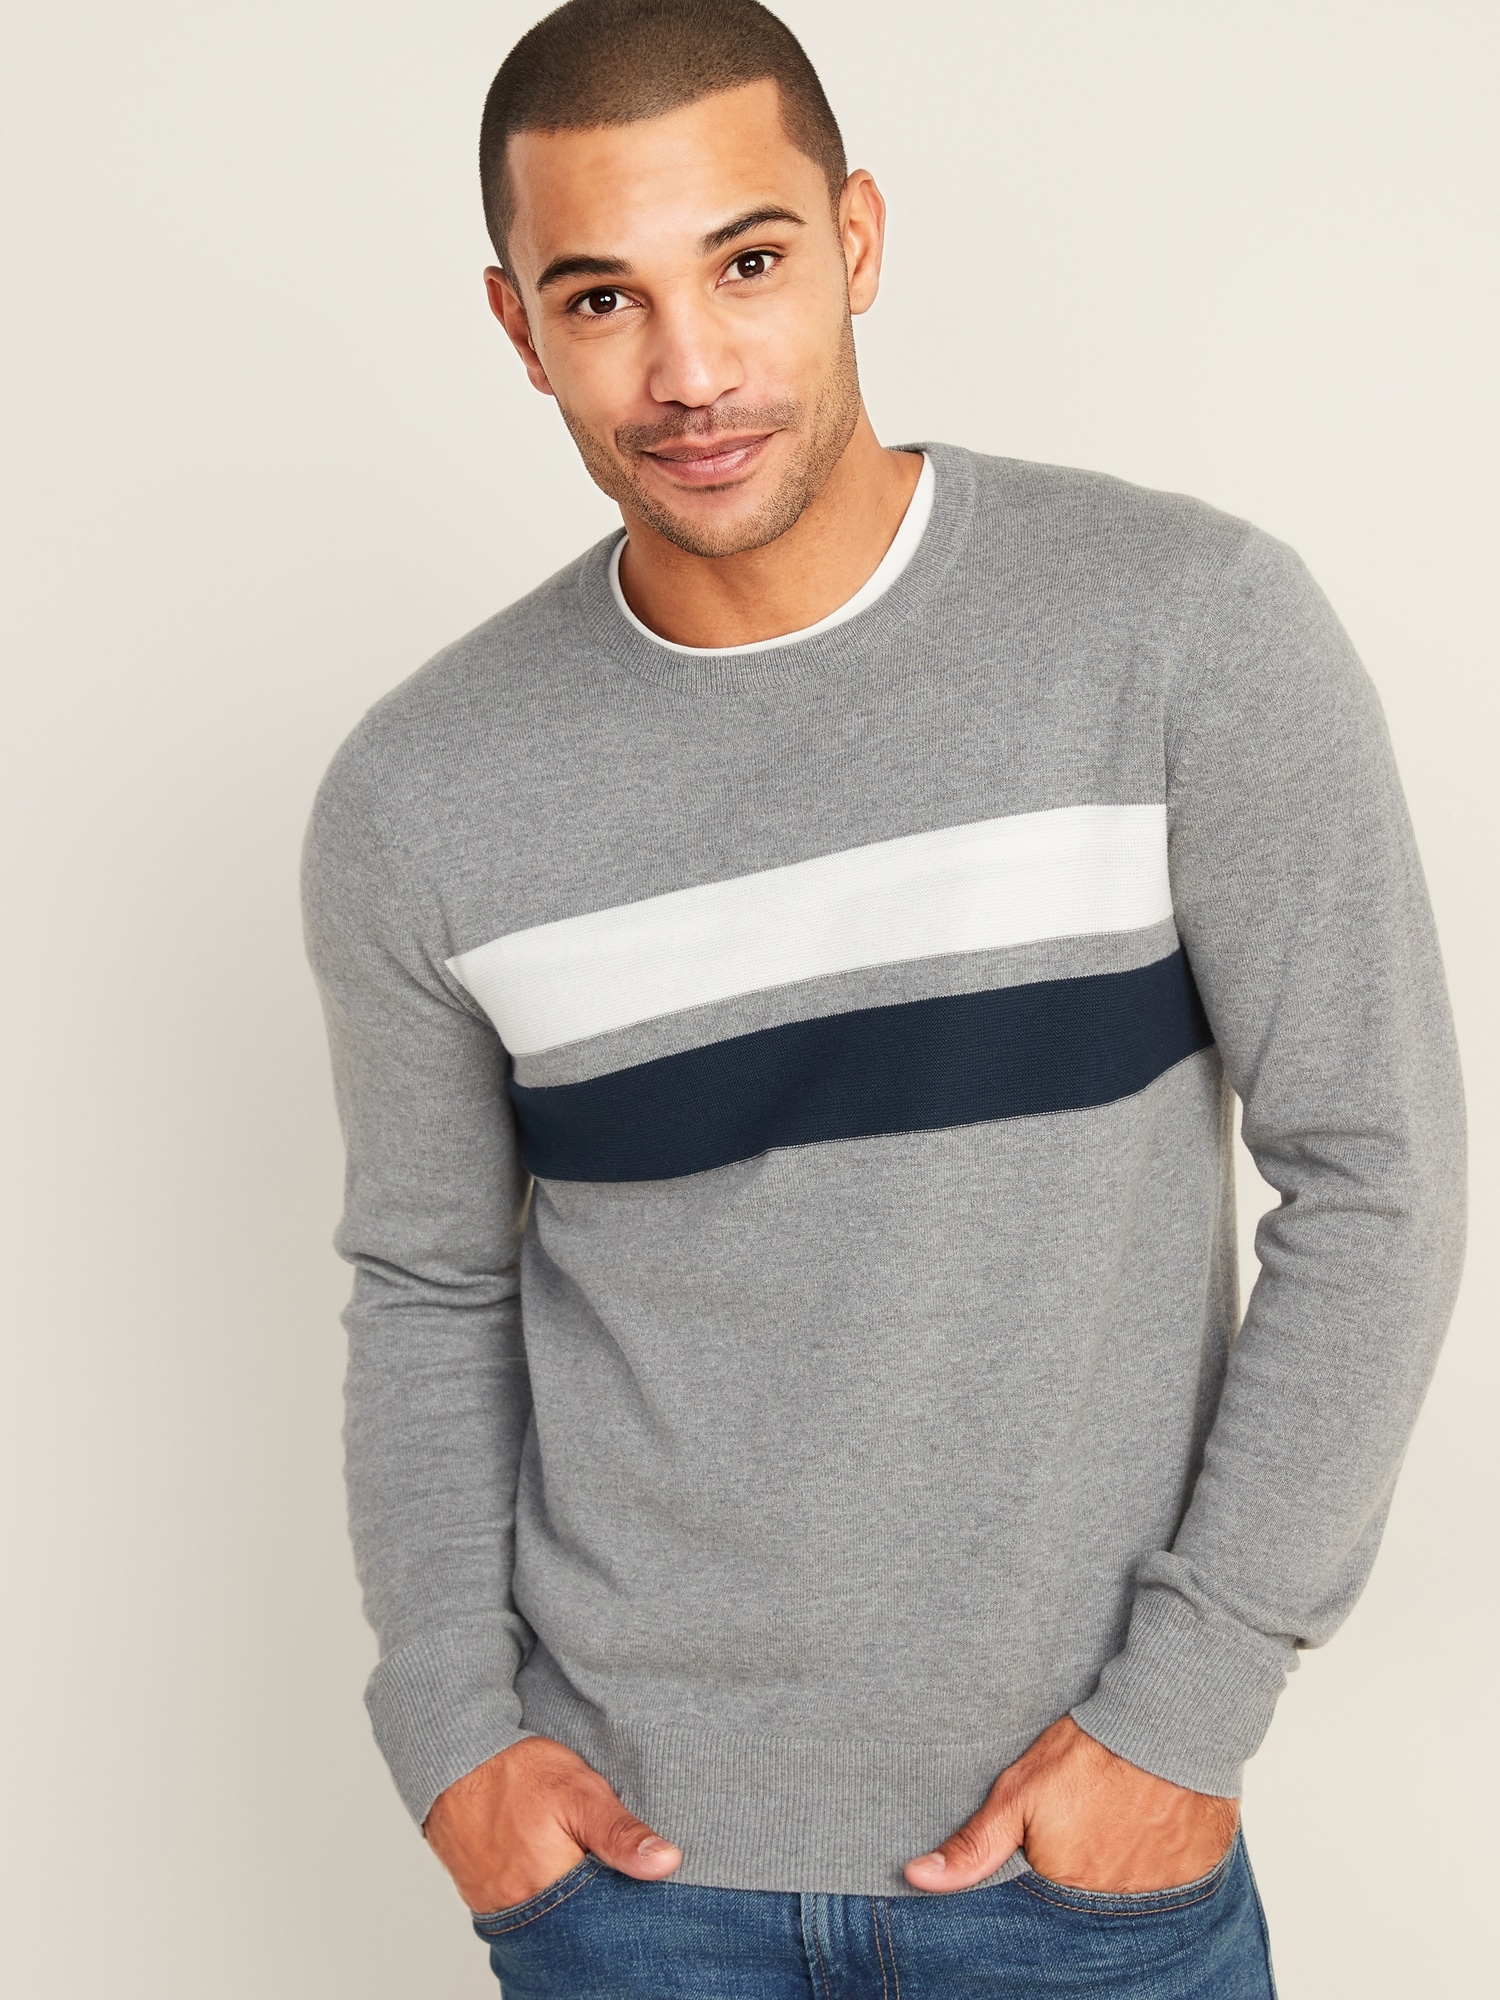 Soft-Washed Color-Blocked Chest-Stripe Tee for Men, Old Navy